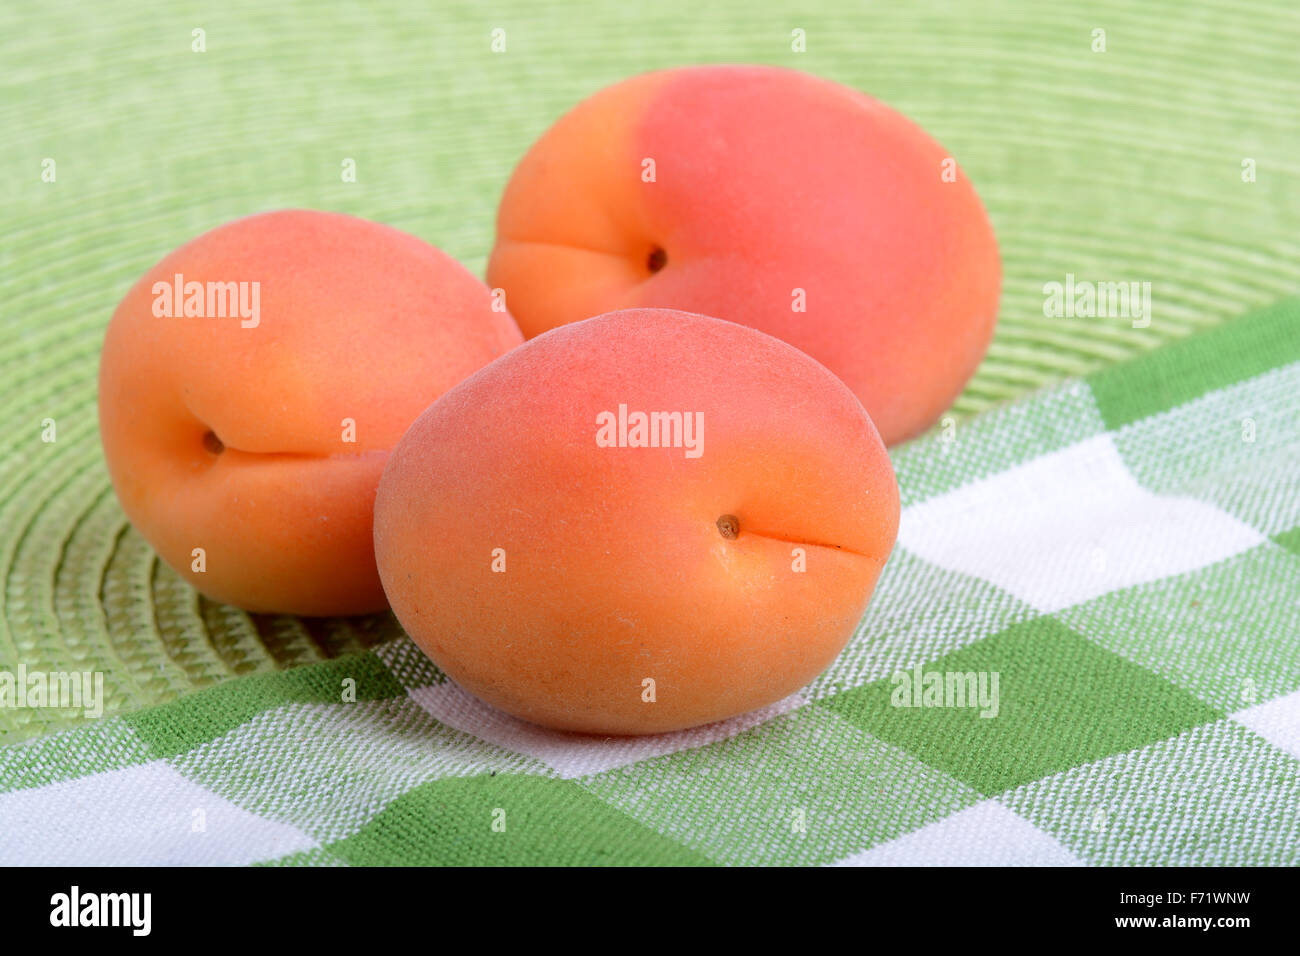 Full peaches close up on green material background Stock Photo